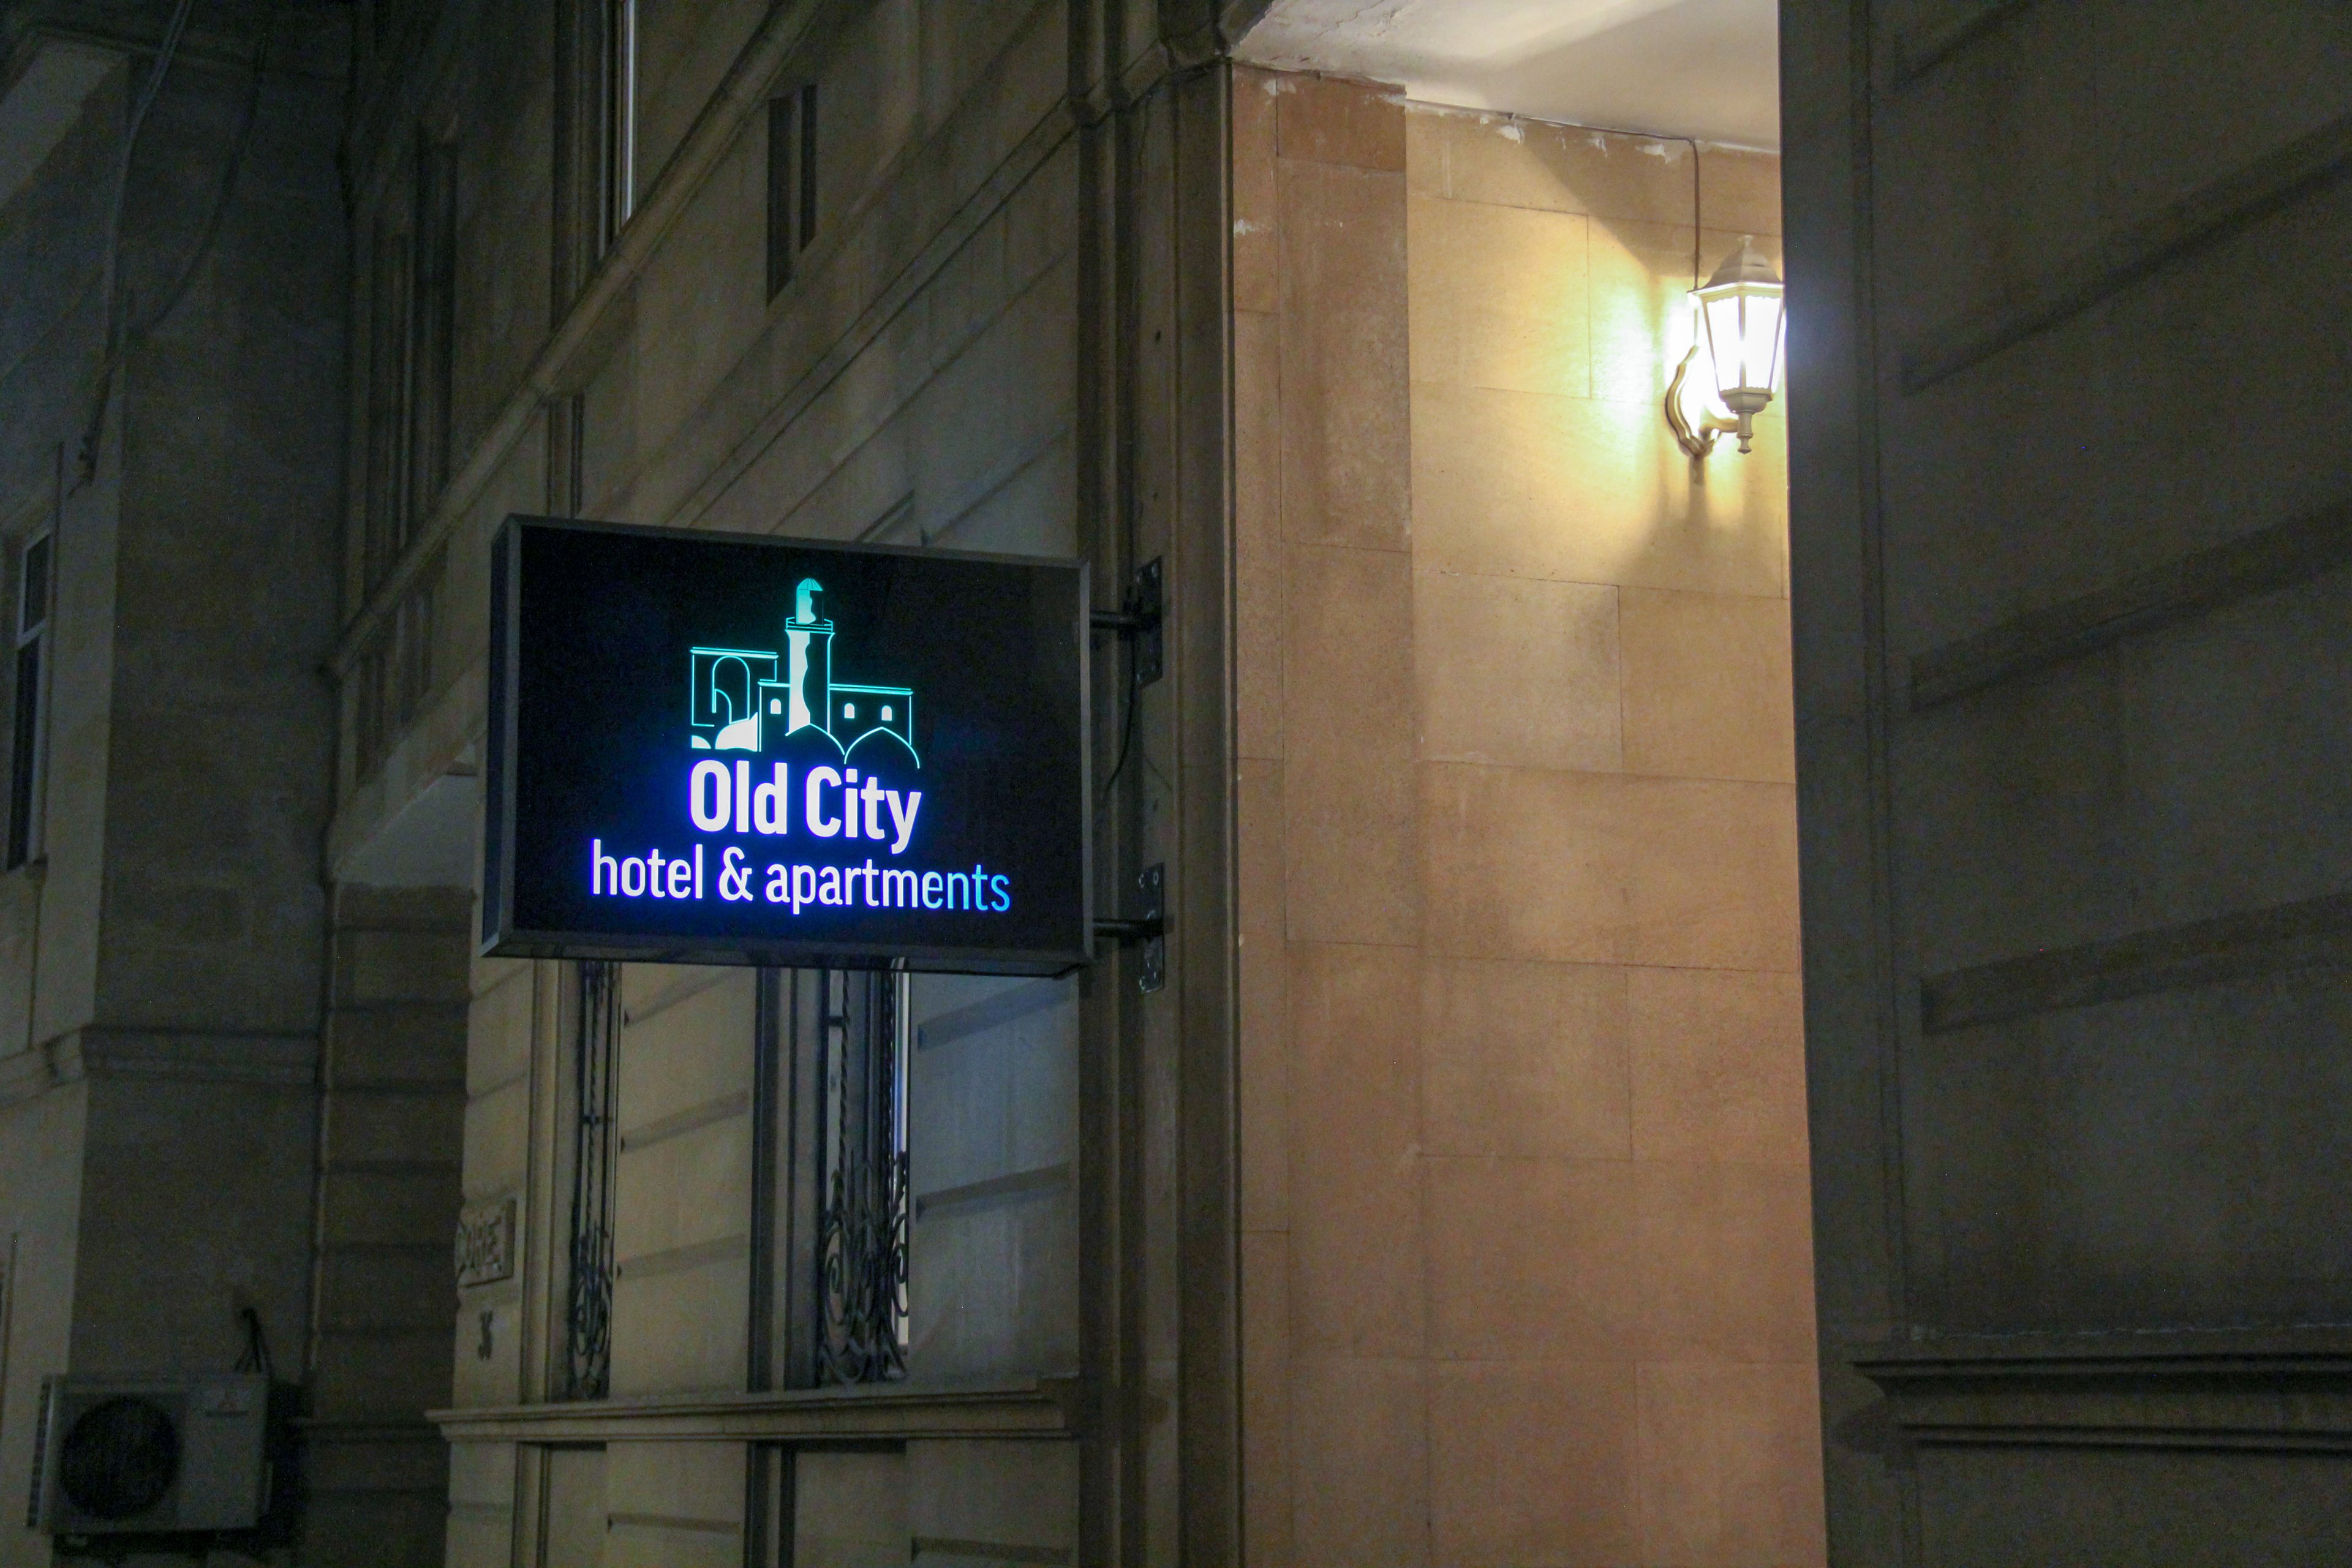 Old City Hotel & Apartments